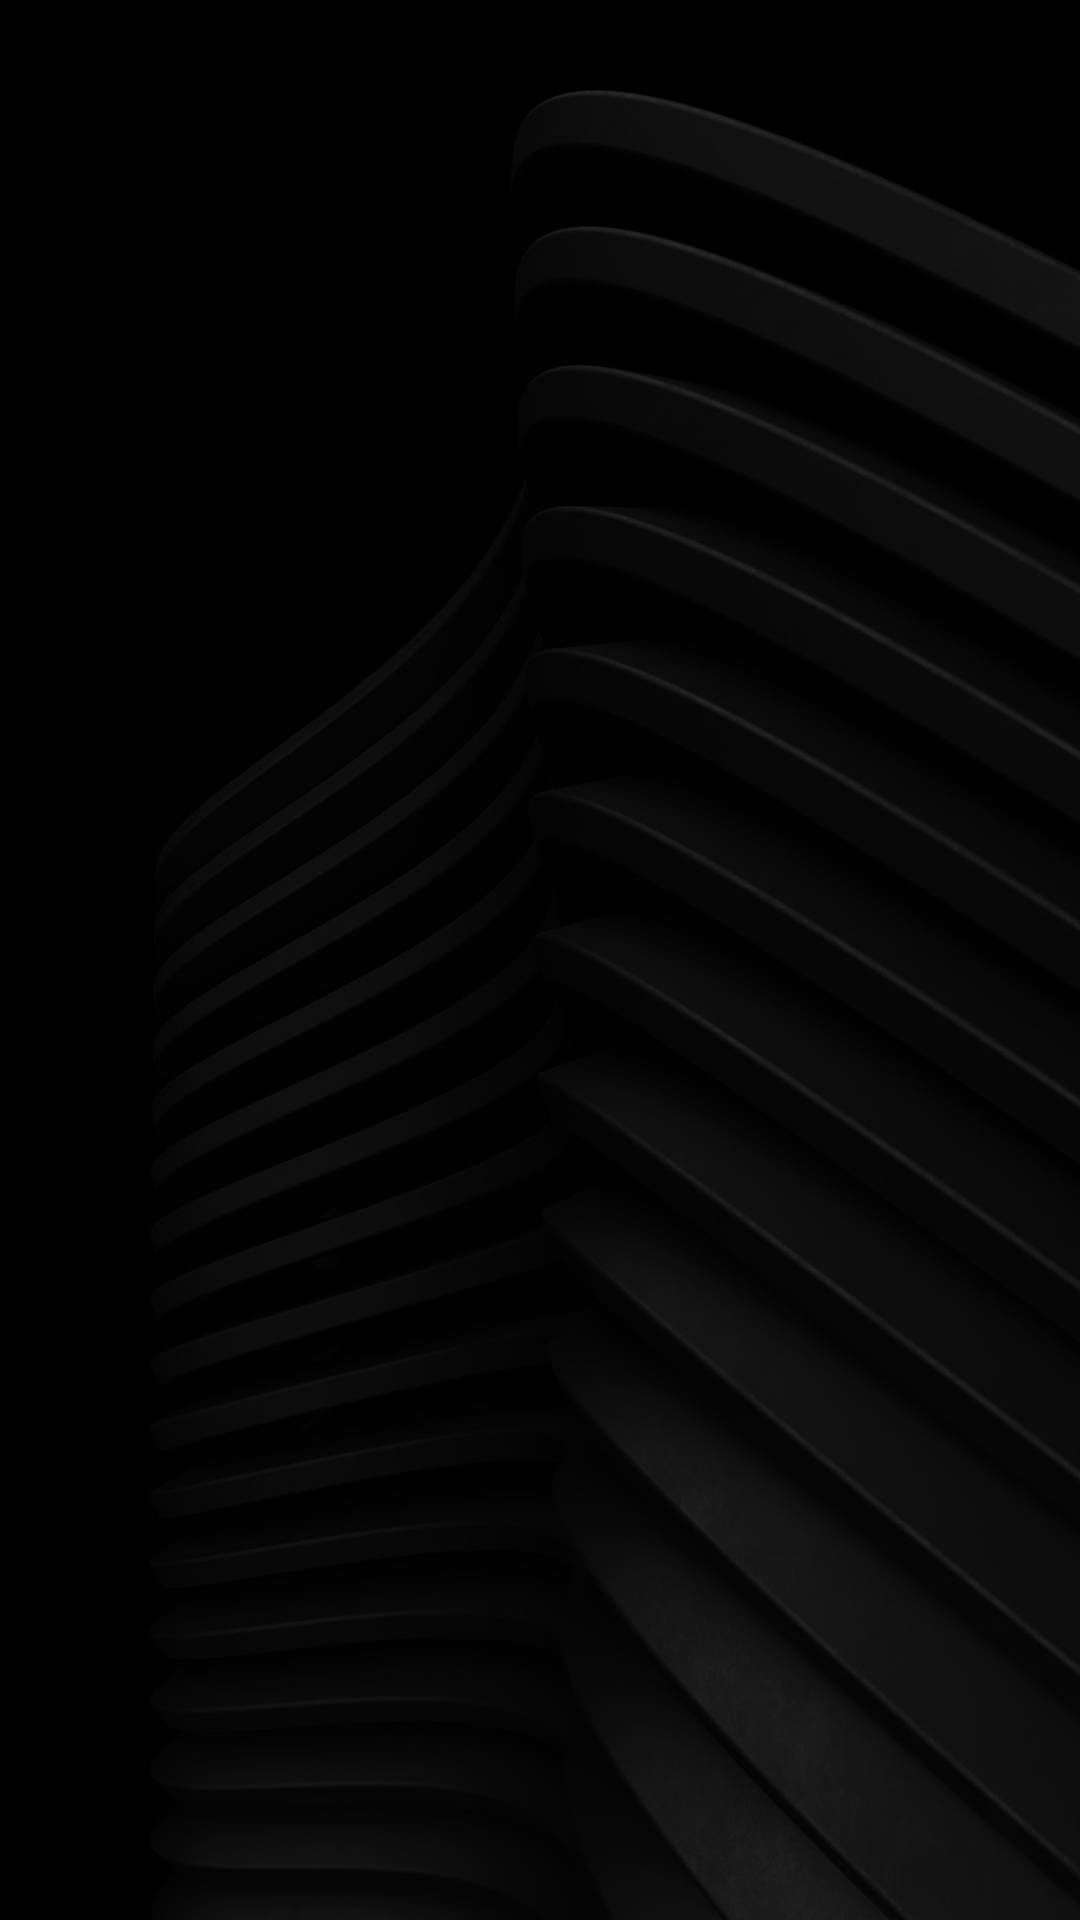 Black Aesthetic Tumblr Iphone Curved Abstract